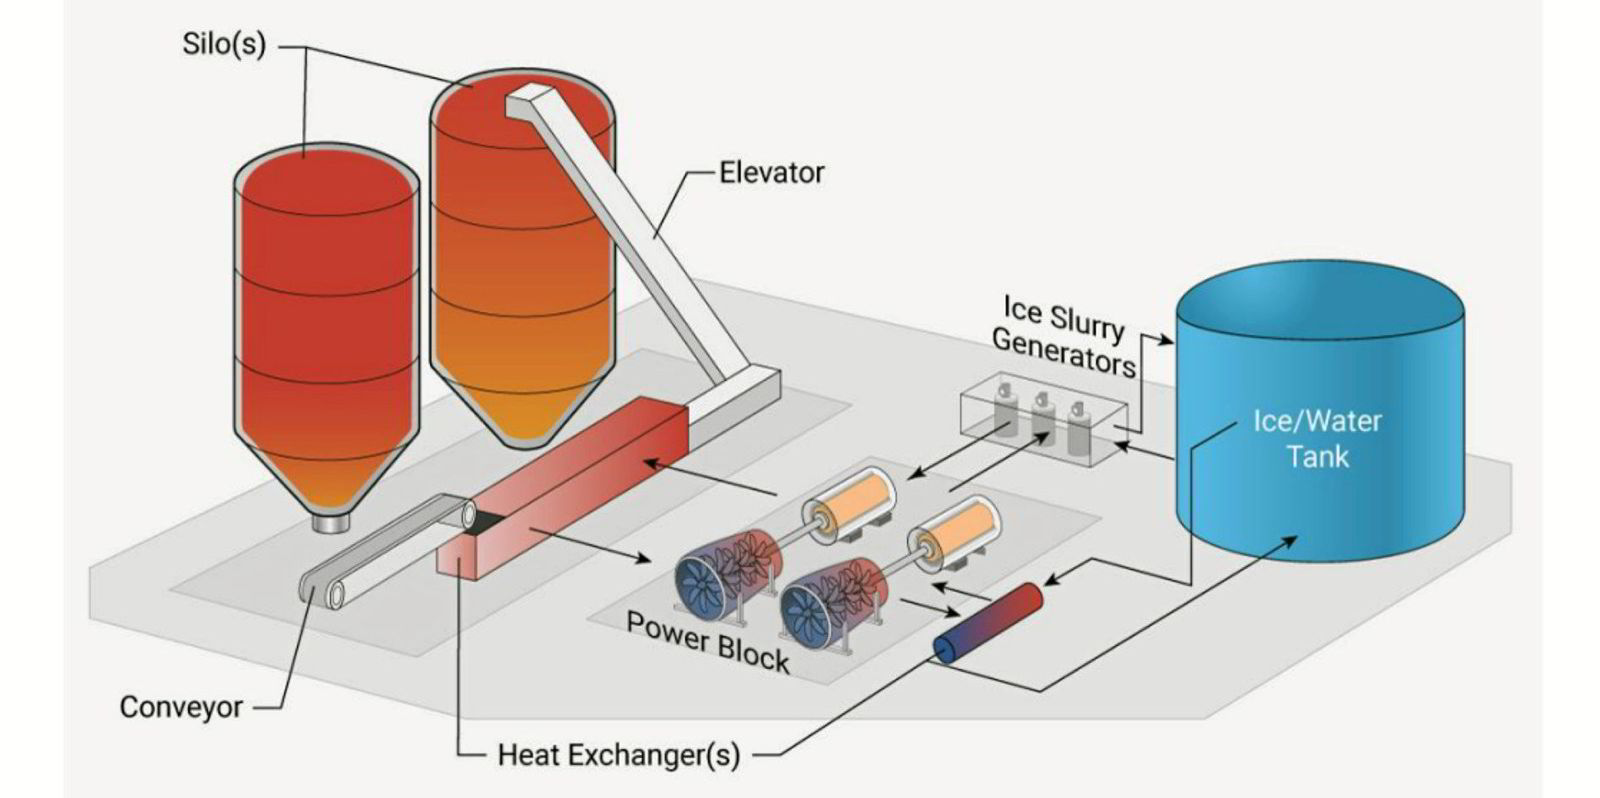 How Does Compressed Air Energy Storage Work?